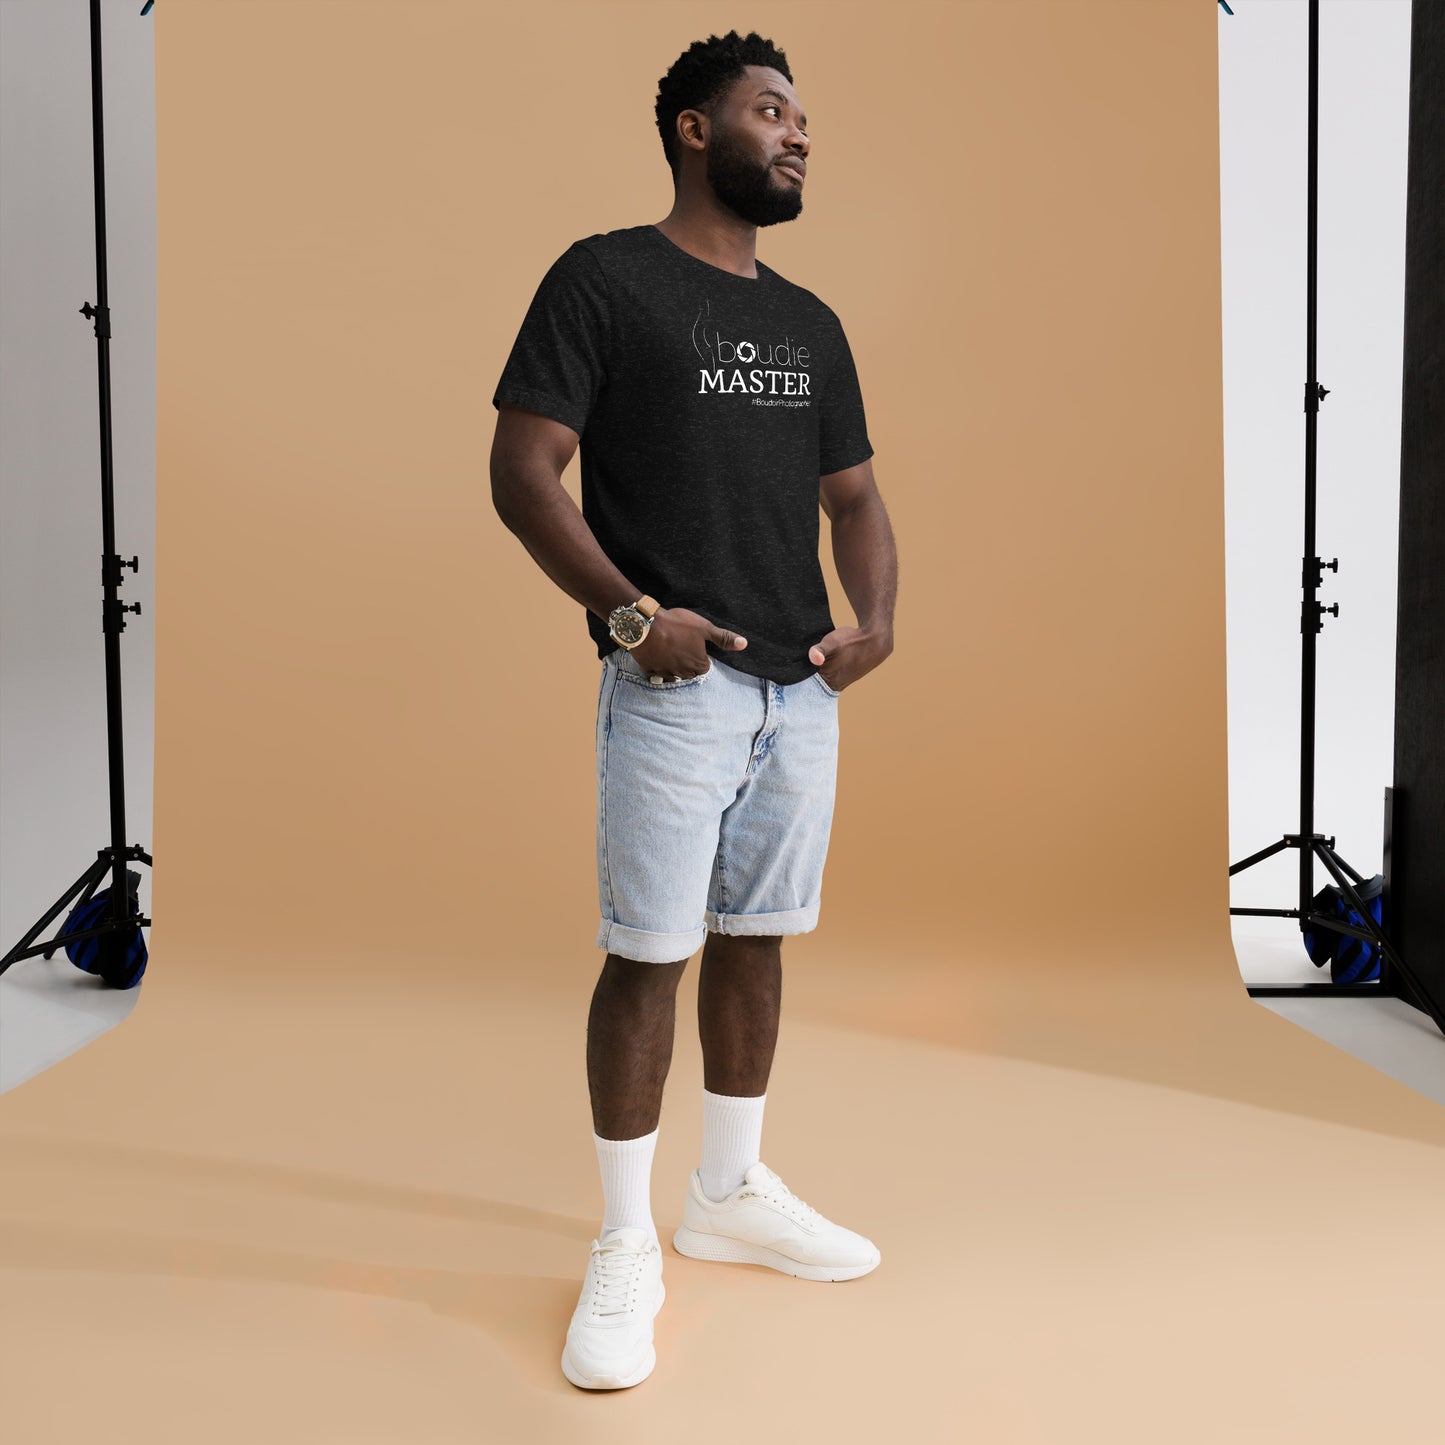 Distinctive Boudie Master T-Shirt | Whoabella Collection